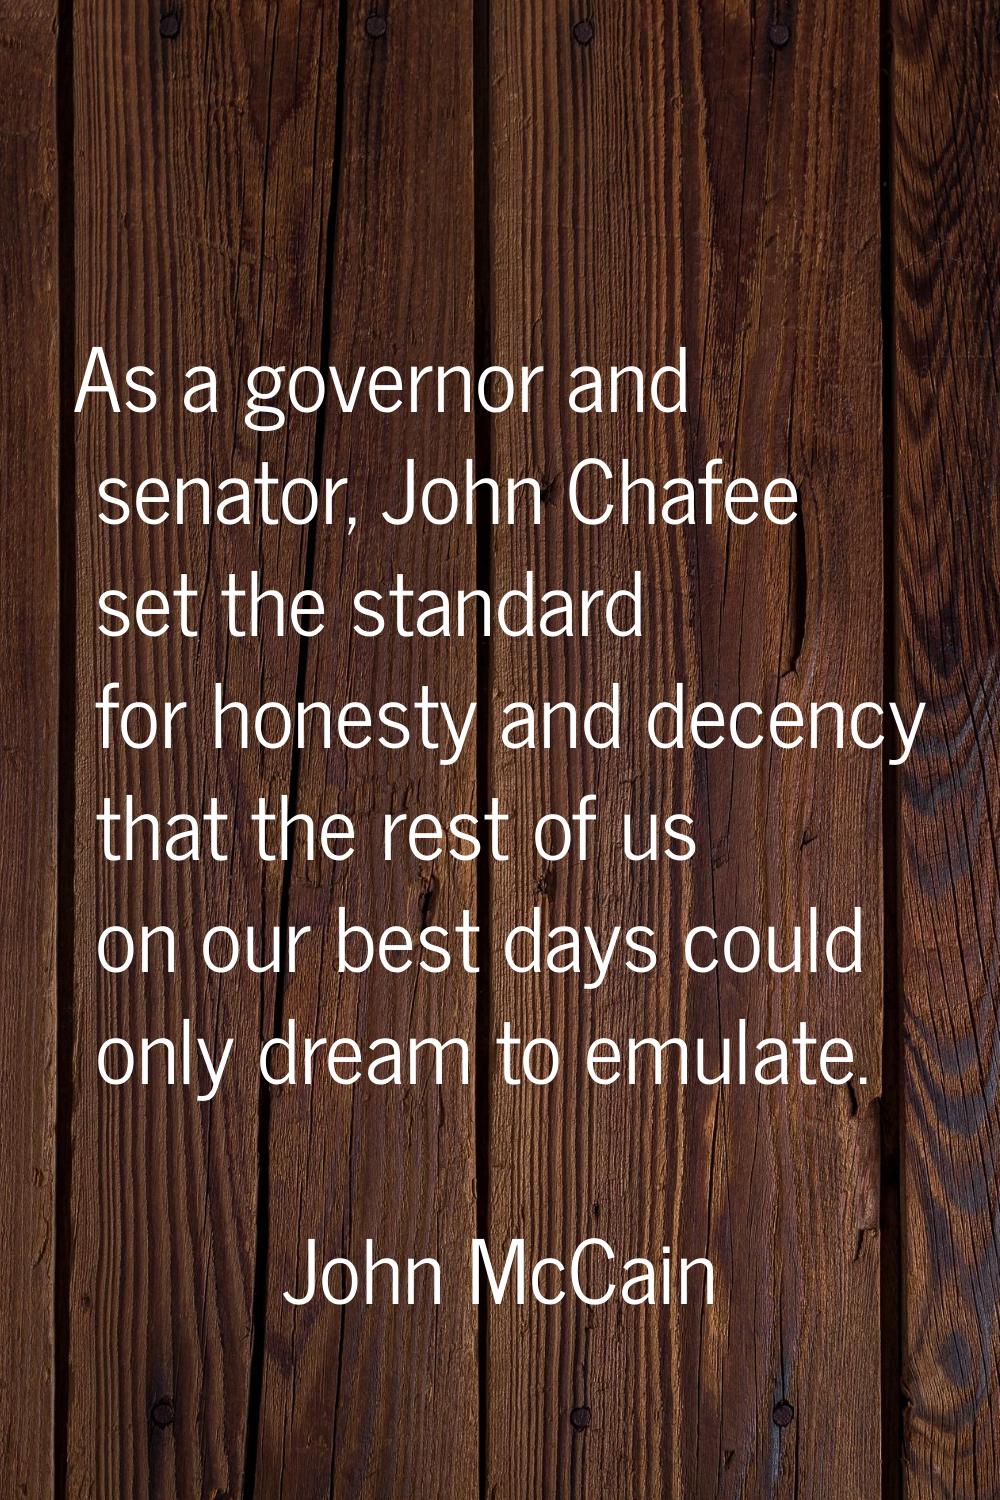 As a governor and senator, John Chafee set the standard for honesty and decency that the rest of us